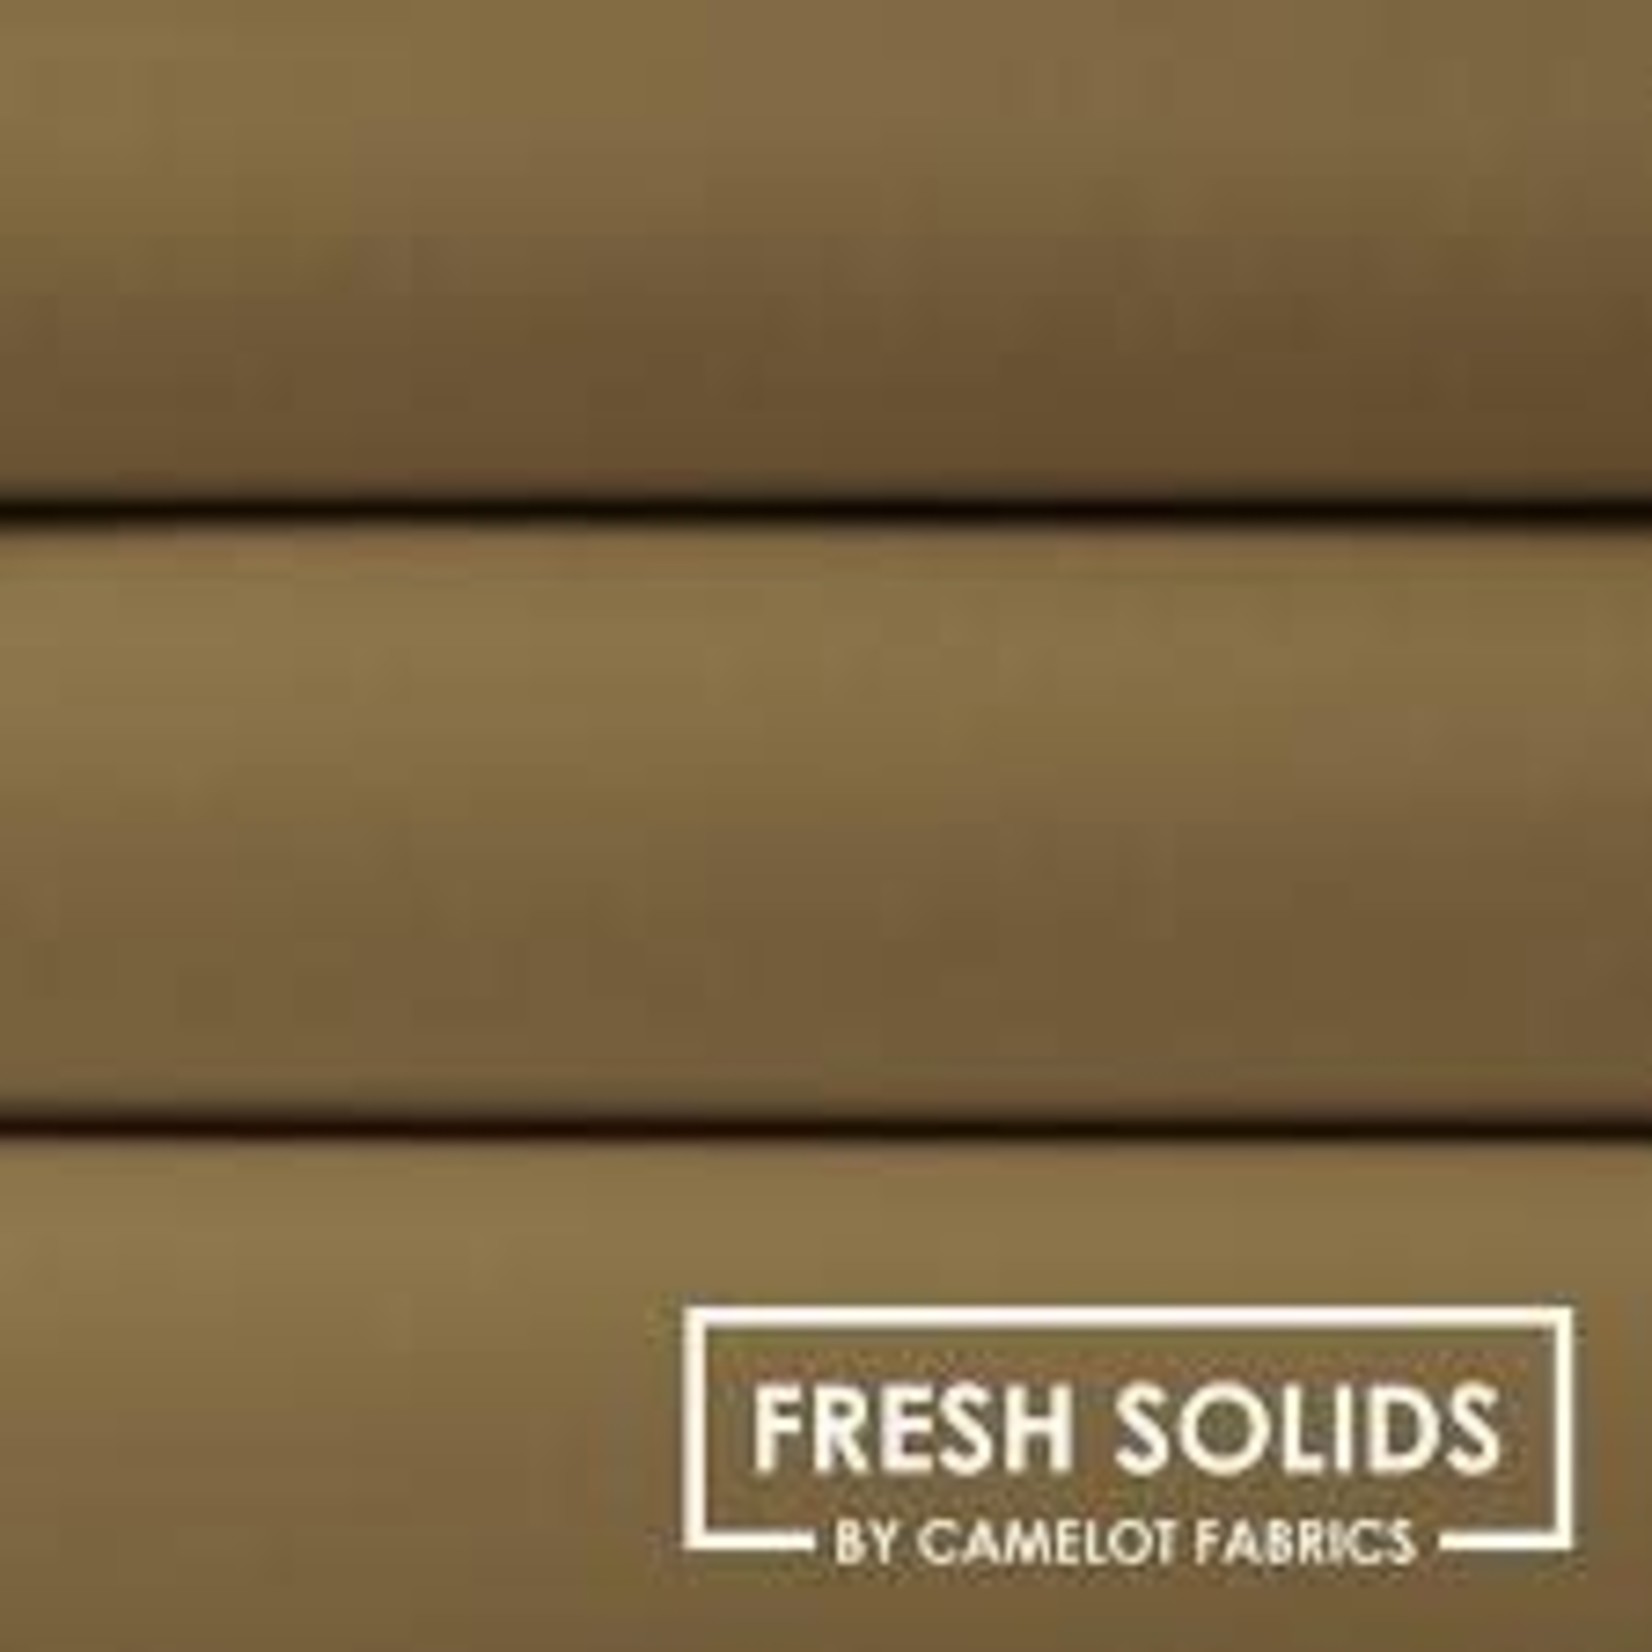 FRESH SOLIDS -100% COTTON - FENNEL SEED - PER METER